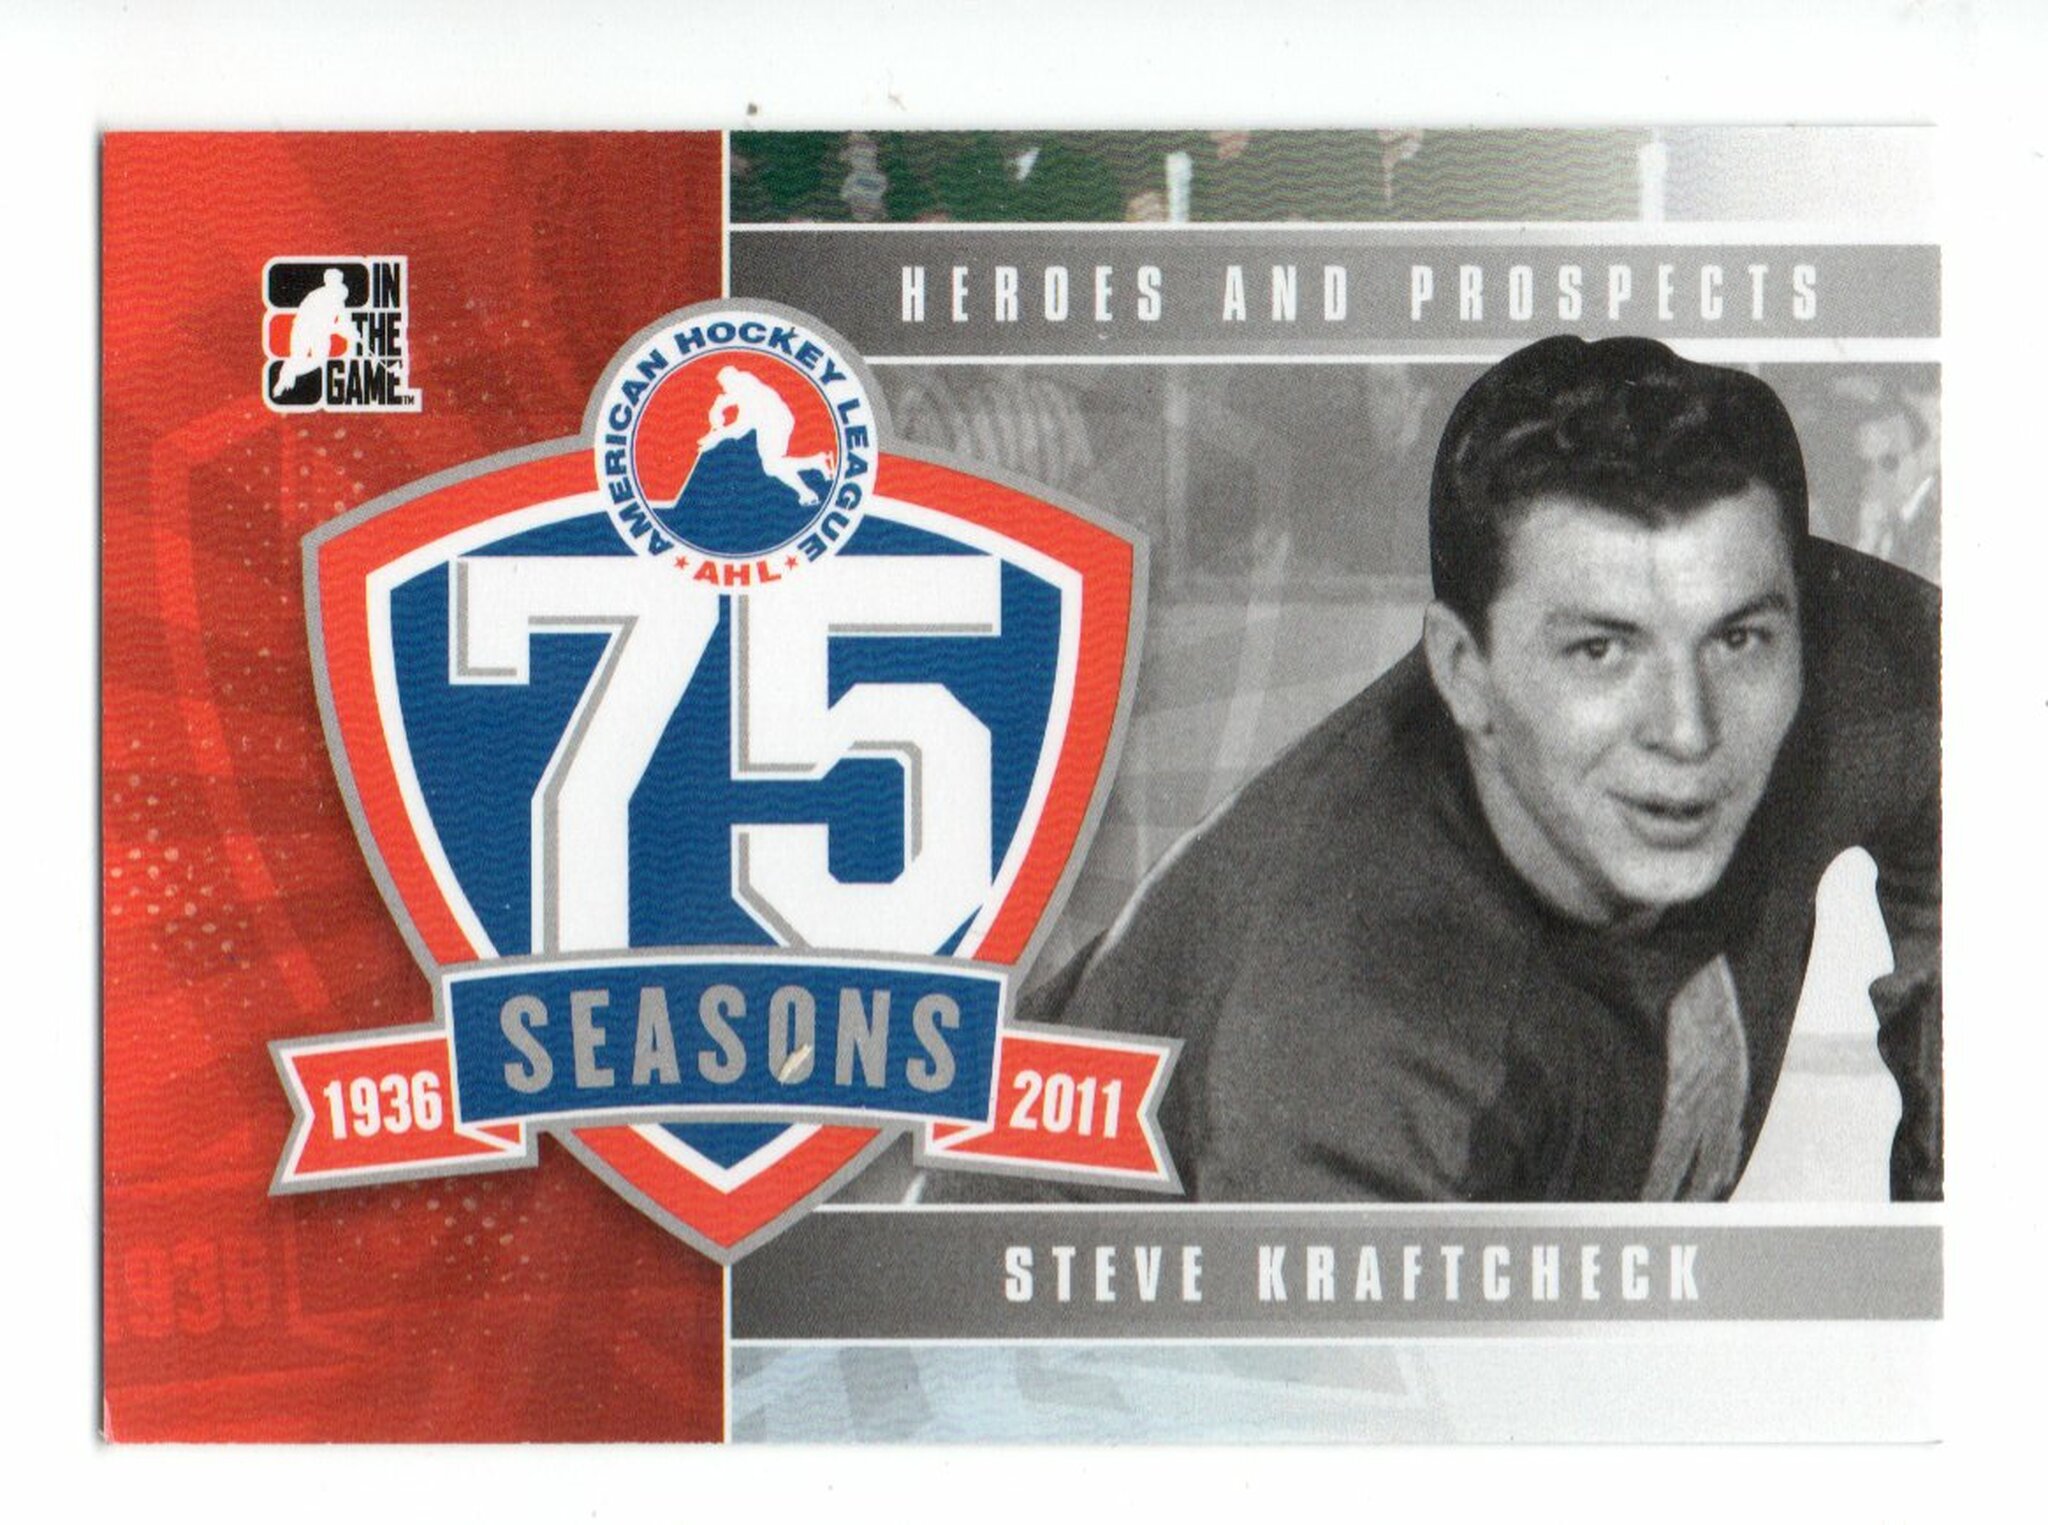 2010-11 ITG Heroes and Prospects AHL 75th Anniversary #AHLA31 Steve Kraftcheck (20-X339-AHL)